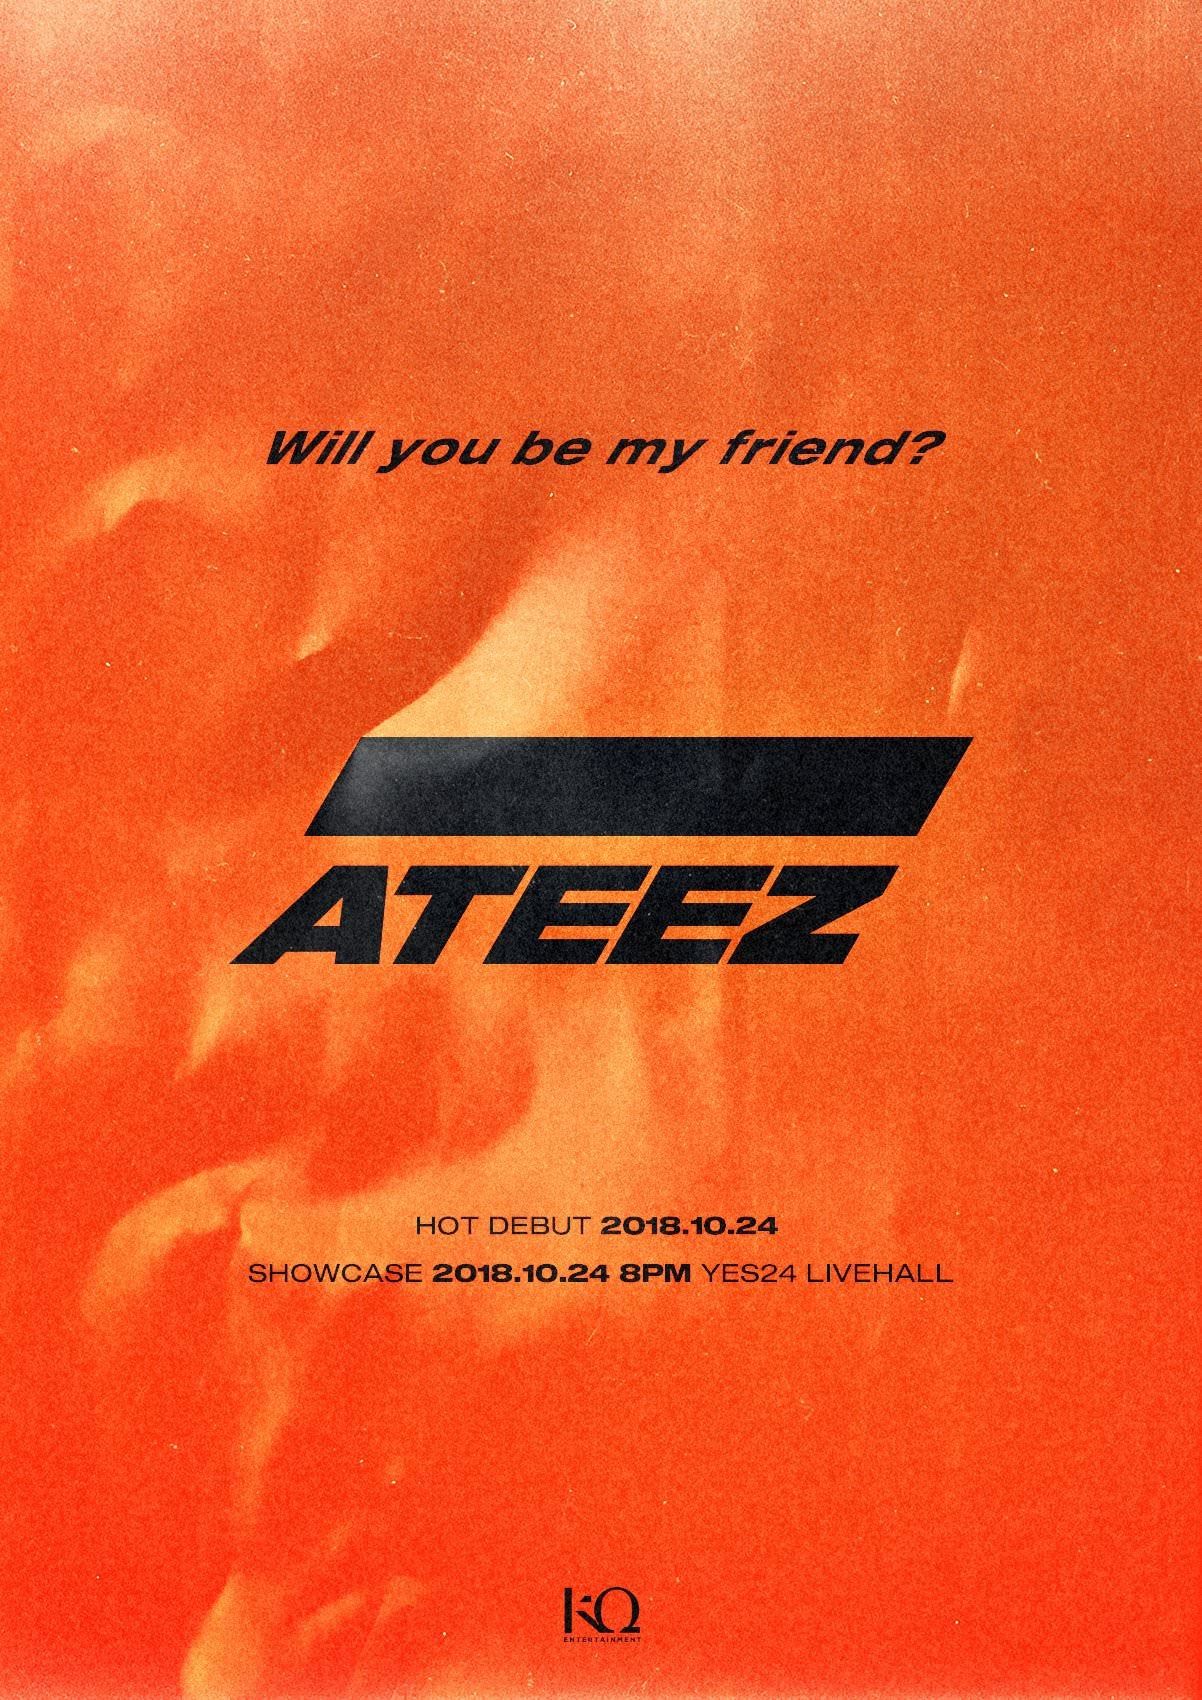 ATEEZ You Be My Friend? (Teaser Image)